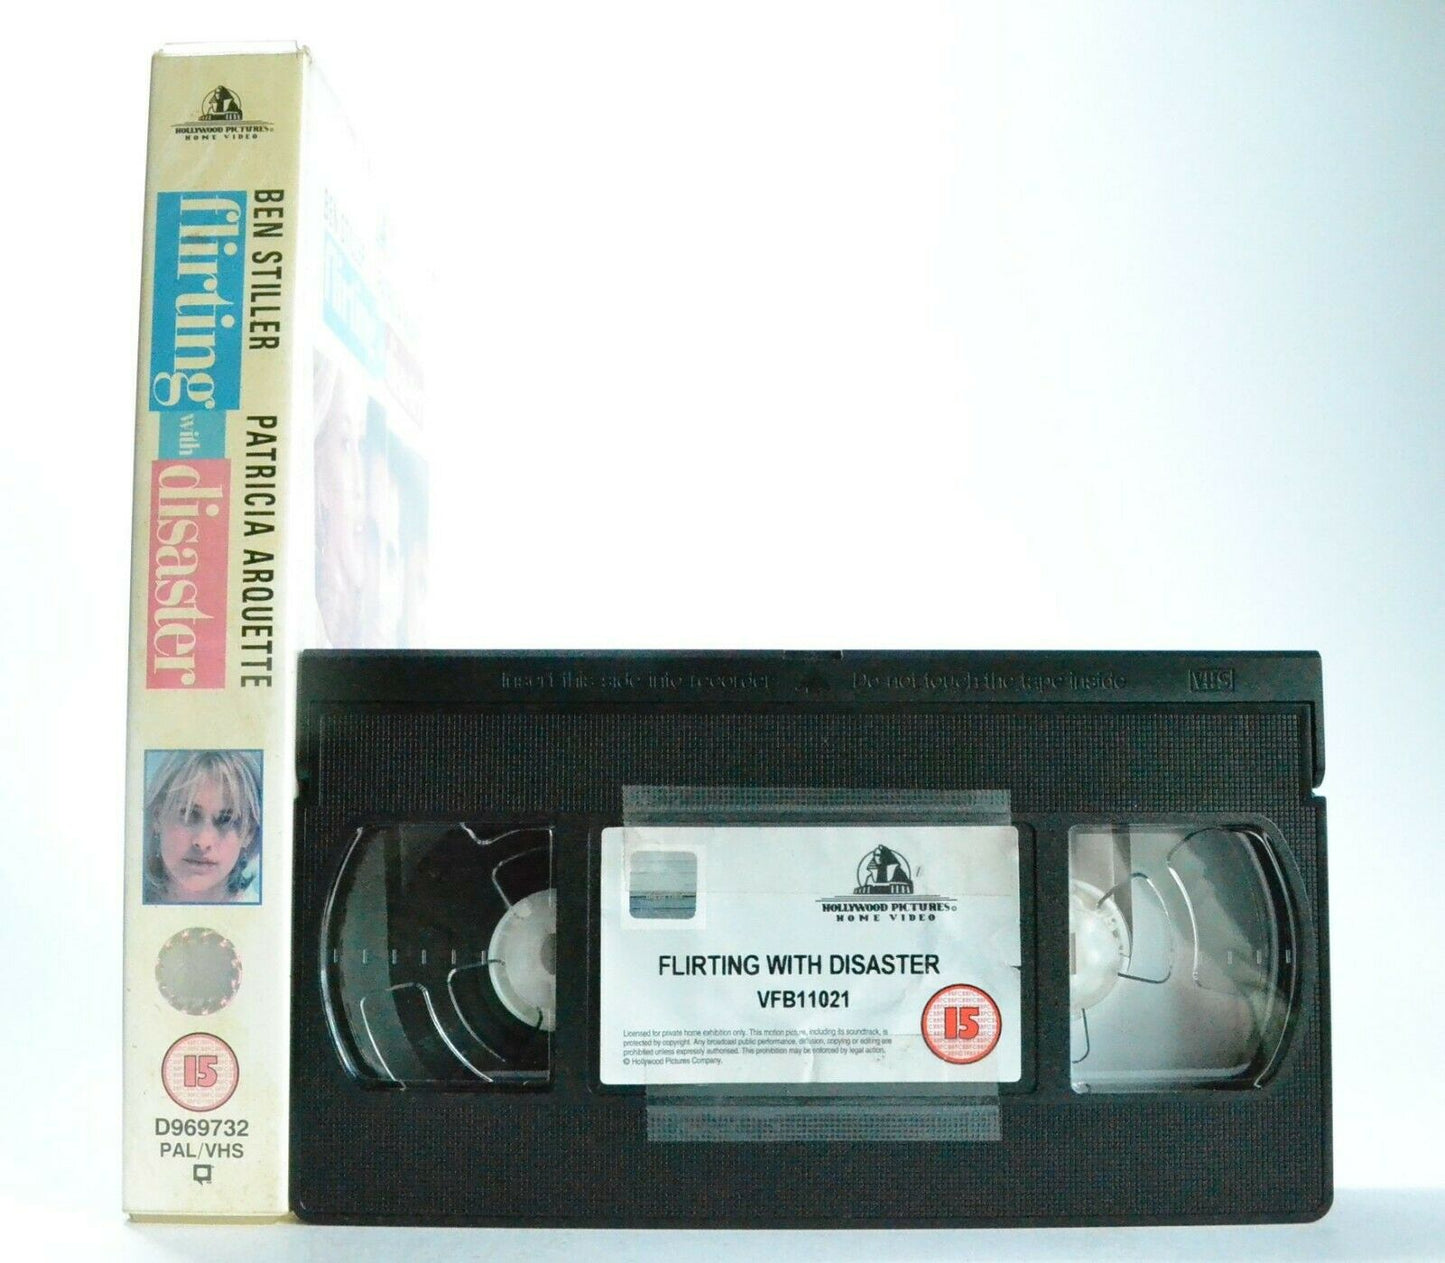 Flirting With Disaster: B.Stiller/P.Arquette - Black Comedy - Large Box - VHS-